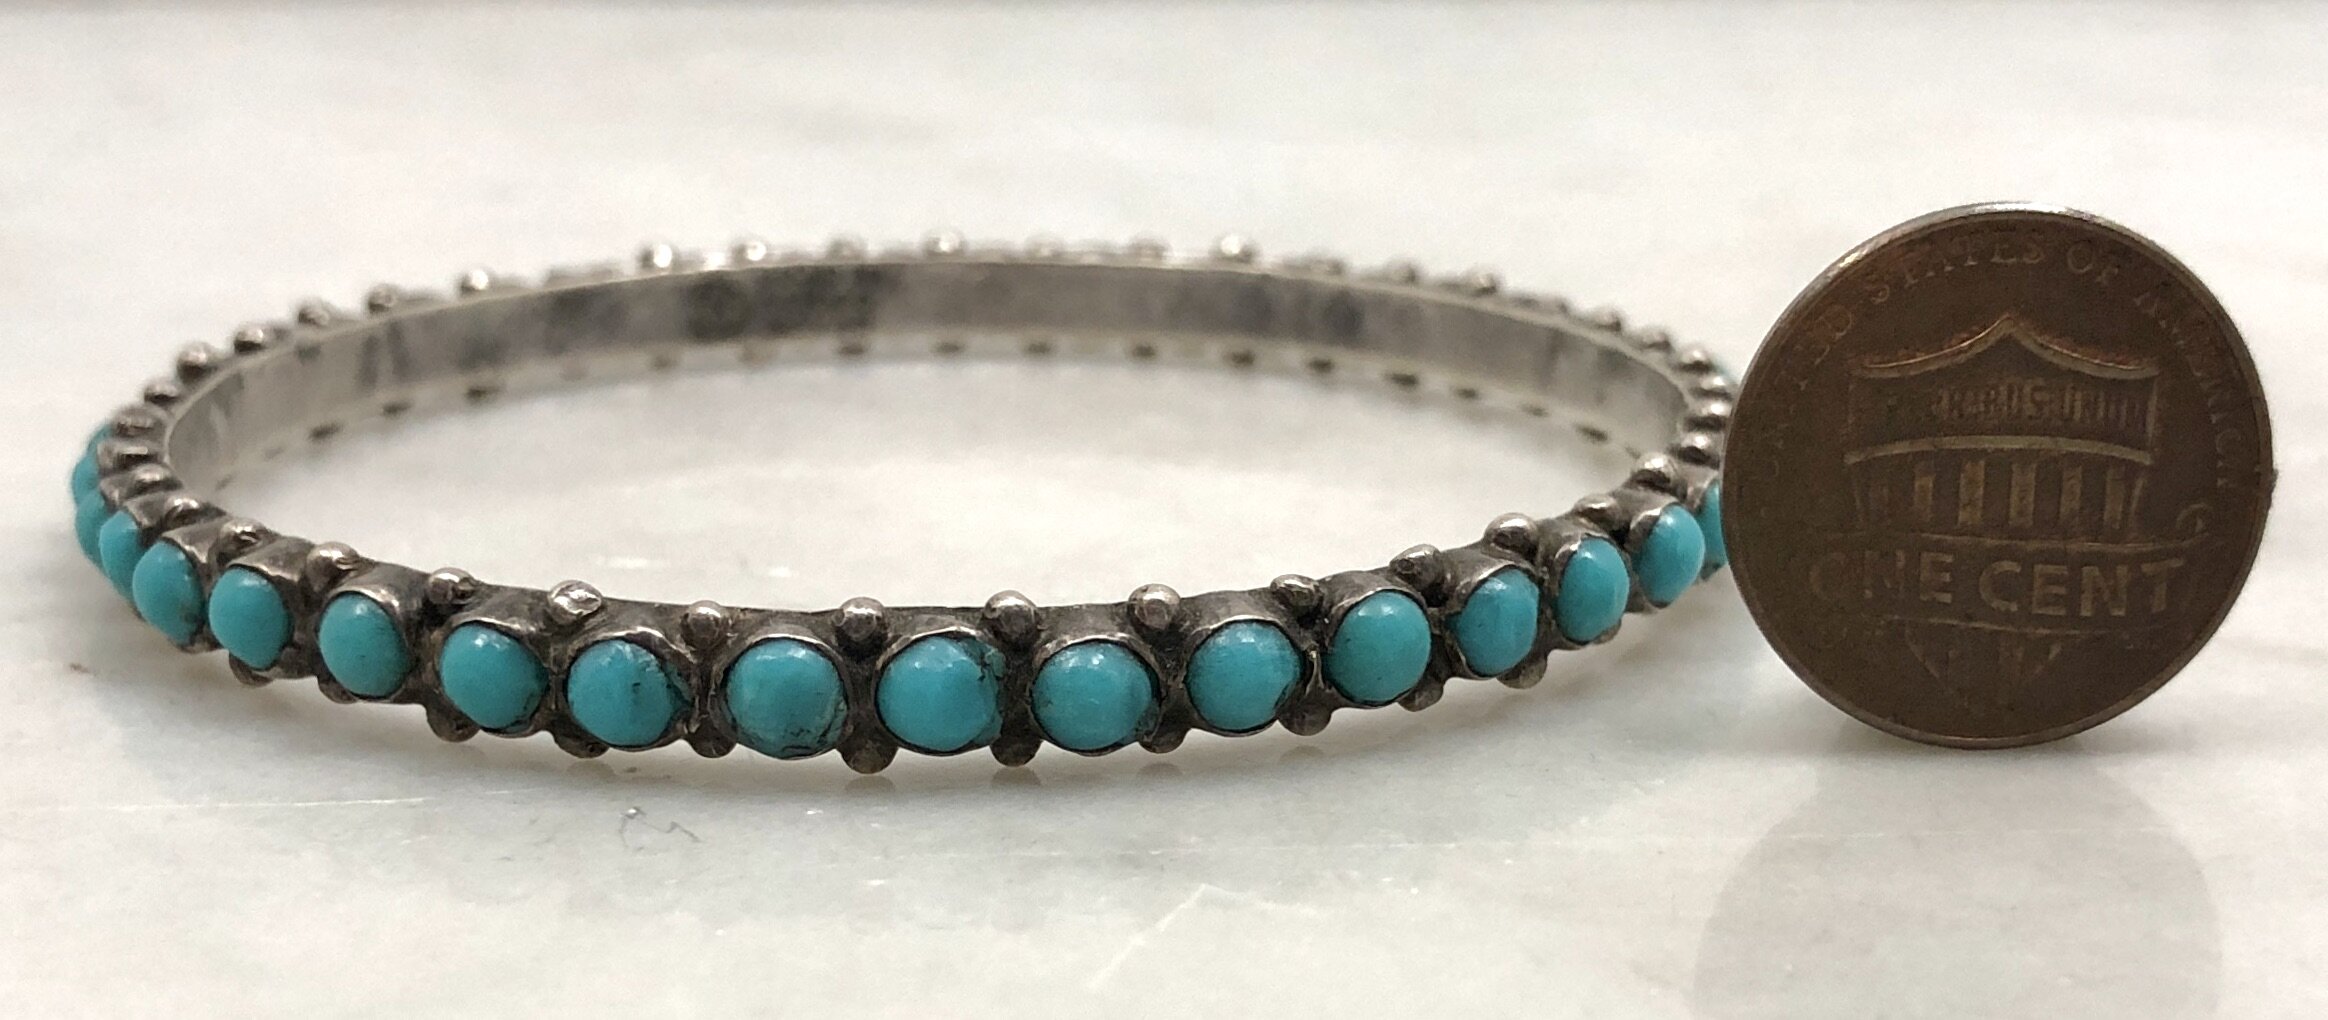 Vintage Mexican Silver Faux Turquoise Bangle Bracelet — Worn-Over-Time